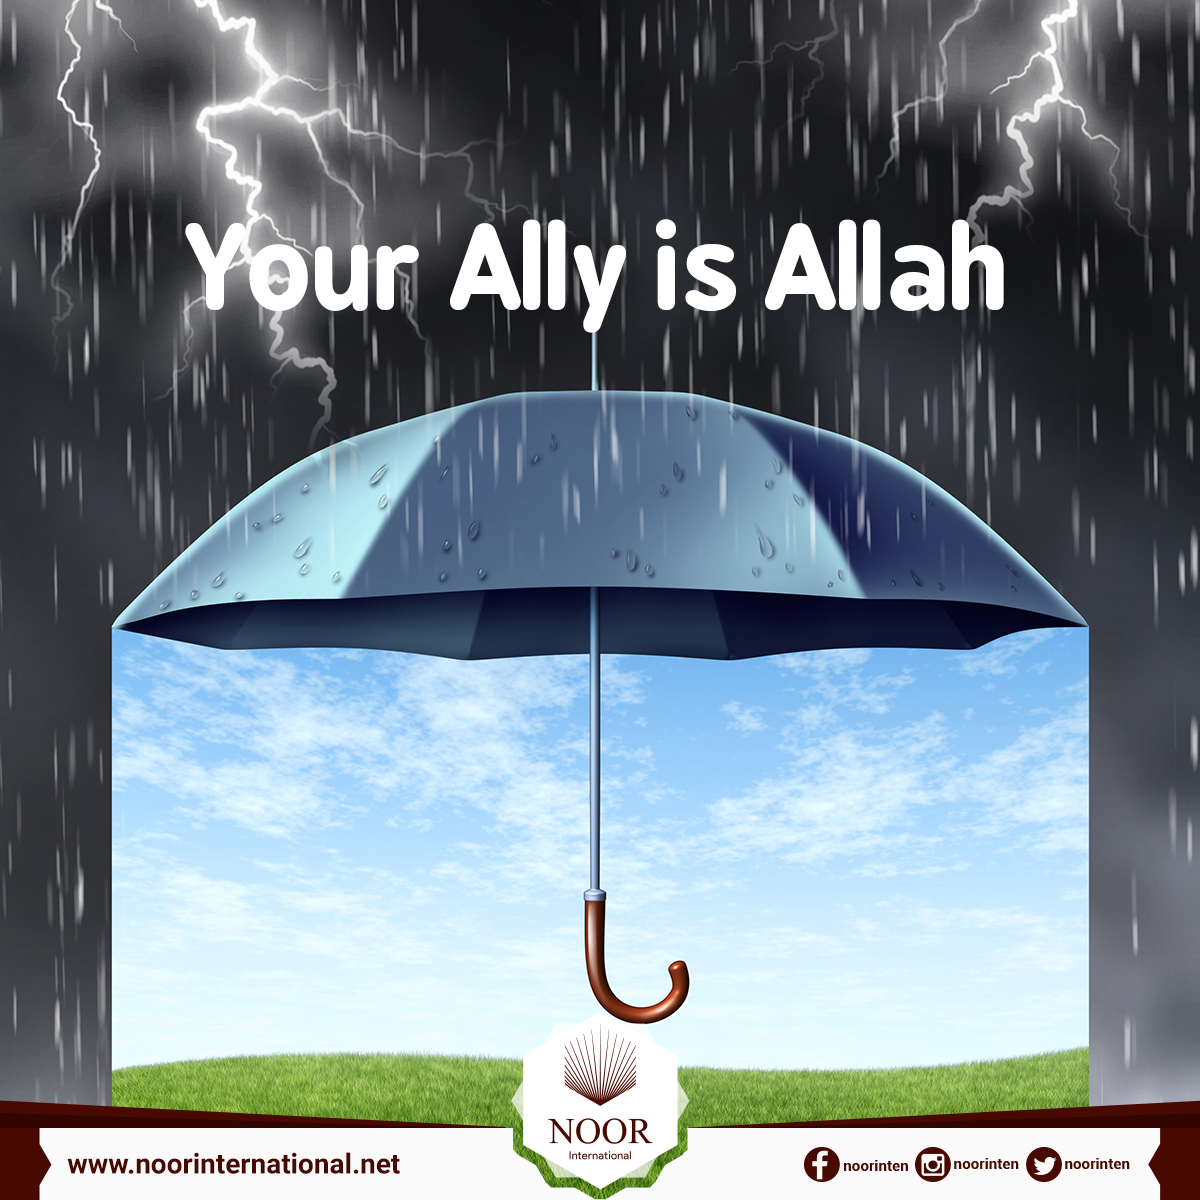 Your Ally is Allah